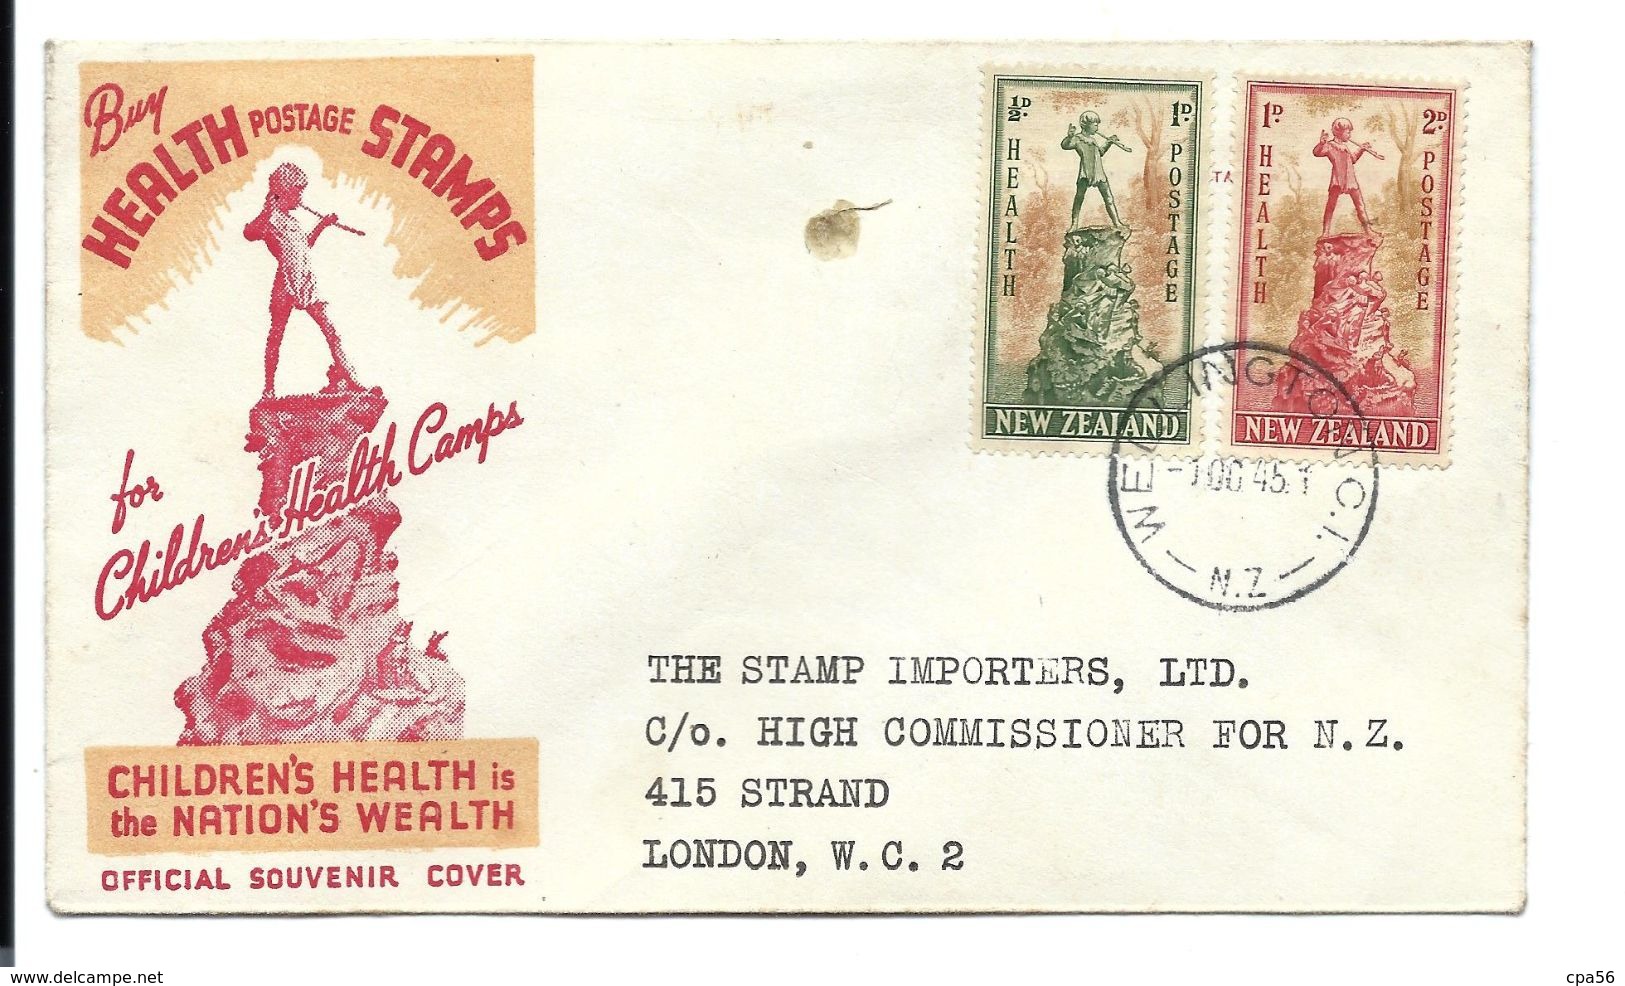 NEW ZEALAND > 2 Health Postage Stamps On Official Souvenir Cover Letter 1945 - Briefe U. Dokumente